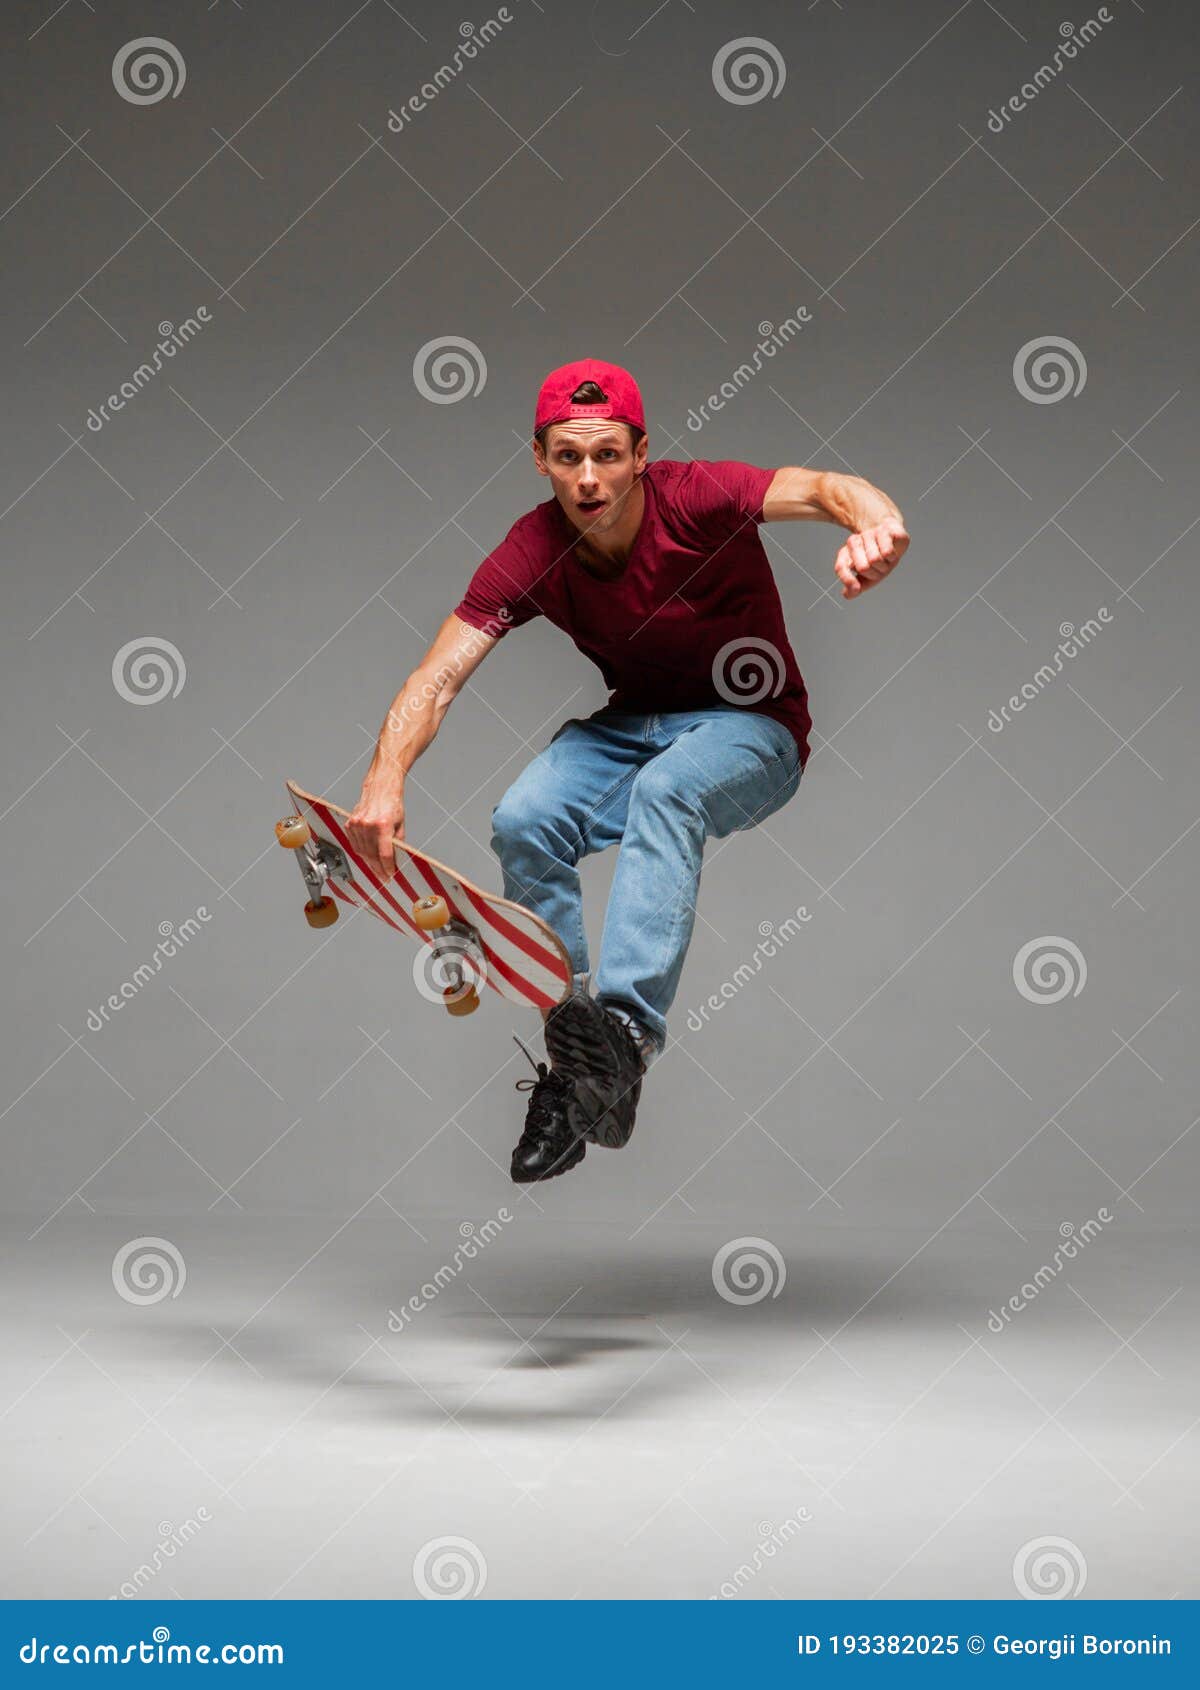 Cool Young Guy Skateboarder Jumps on Skateboard in Studio on Grey ...